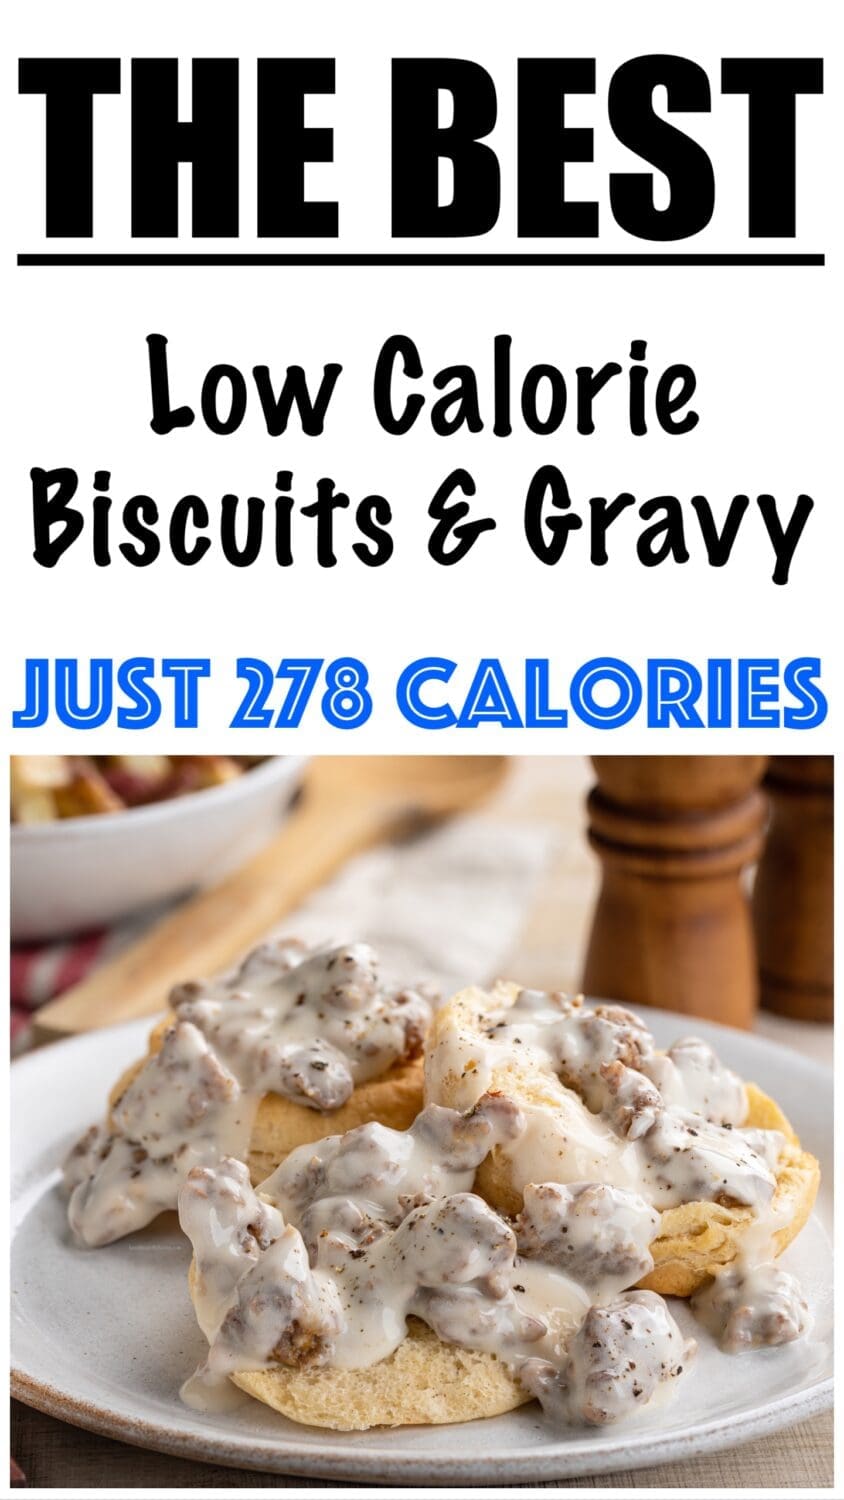 Healthy Biscuits and Gravy Recipe